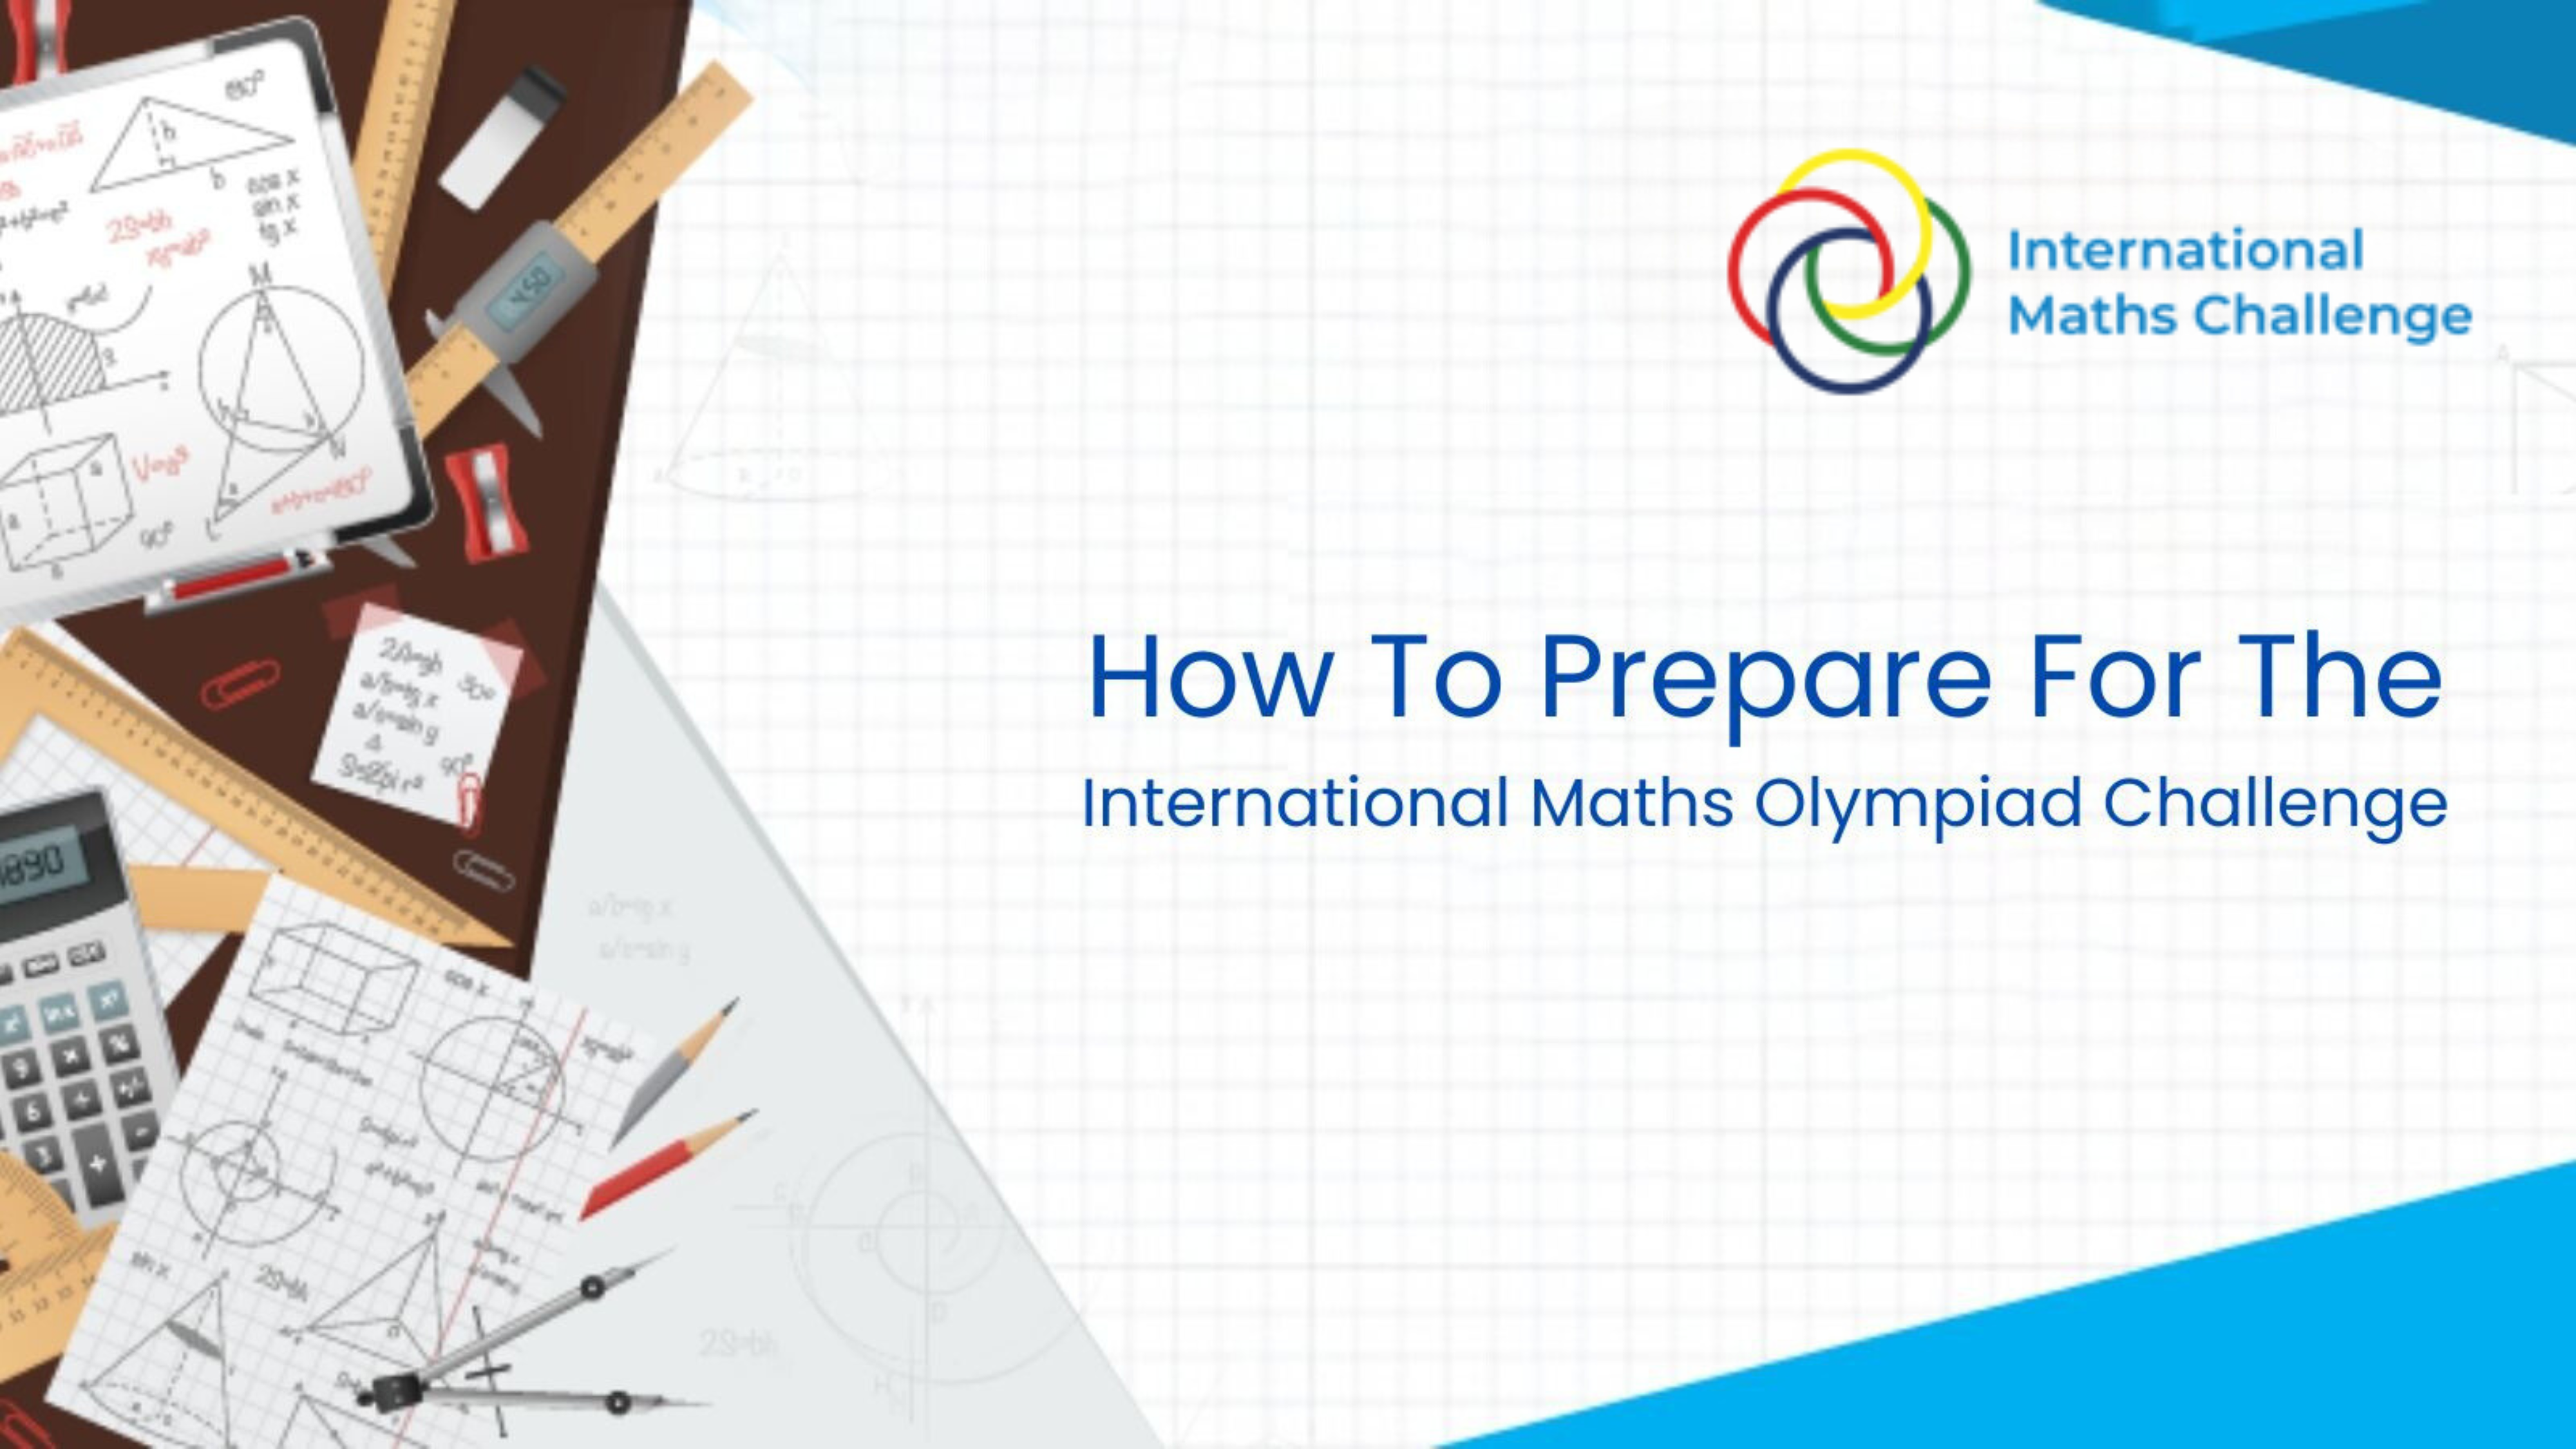 How To Prepare For International Maths Olympiad?